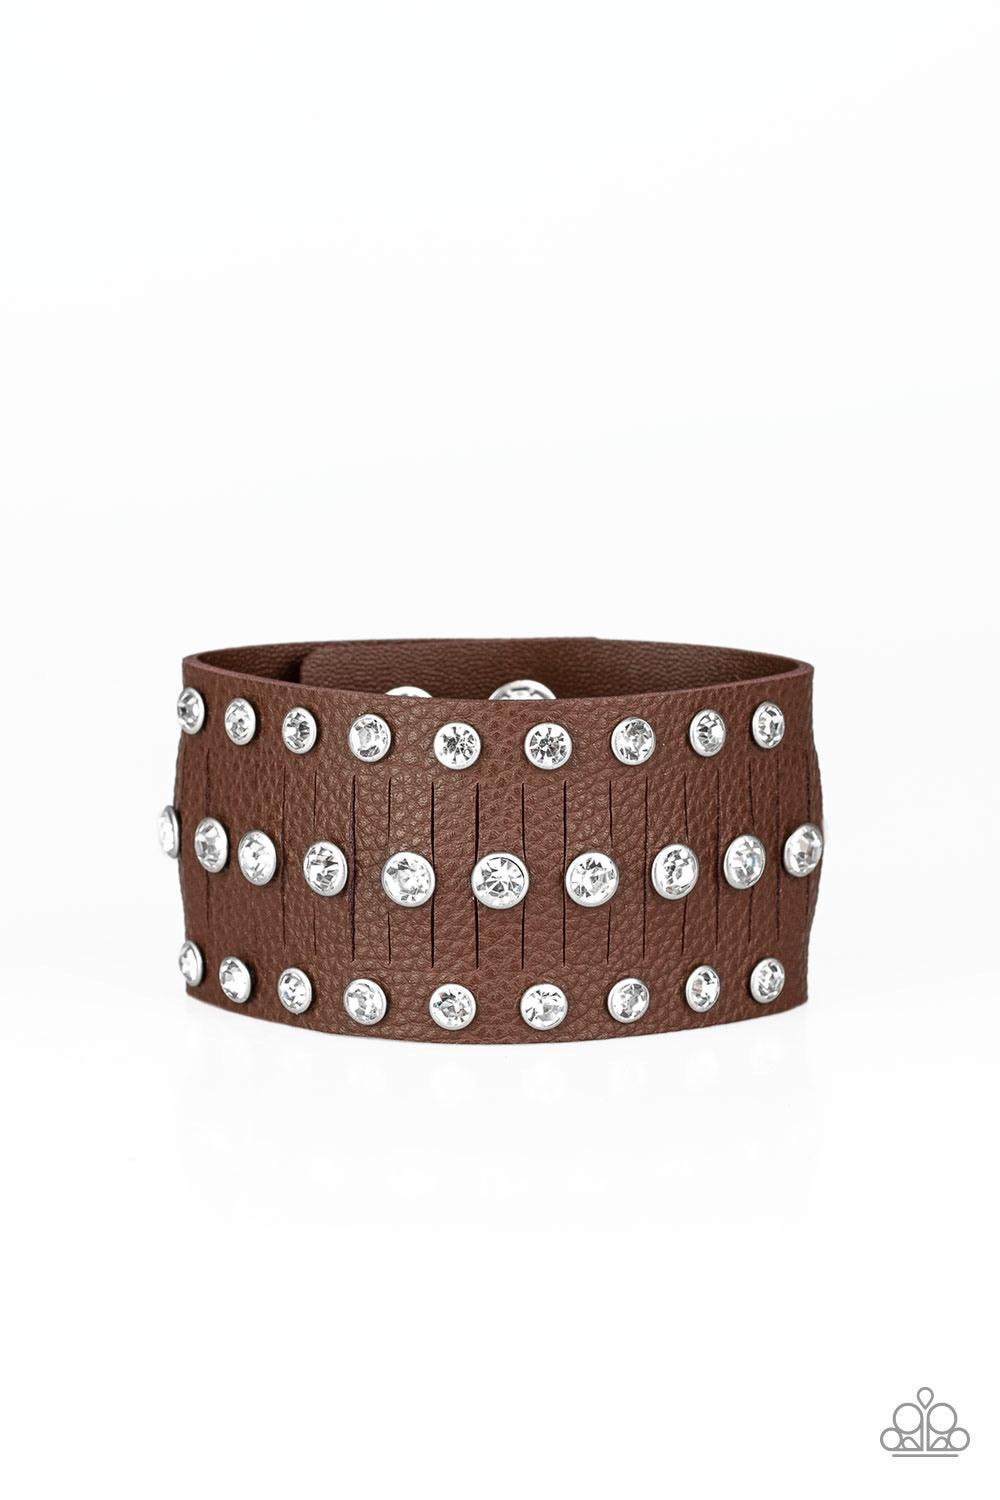 Paparazzi Accessories Now Taking The Stage - Brown Pressed into sleek silver frames, glittery white rhinestones are studded across a thick brown leather band featuring a center lined with slits for a sassy finish. Features an adjustable snap closure. Sold